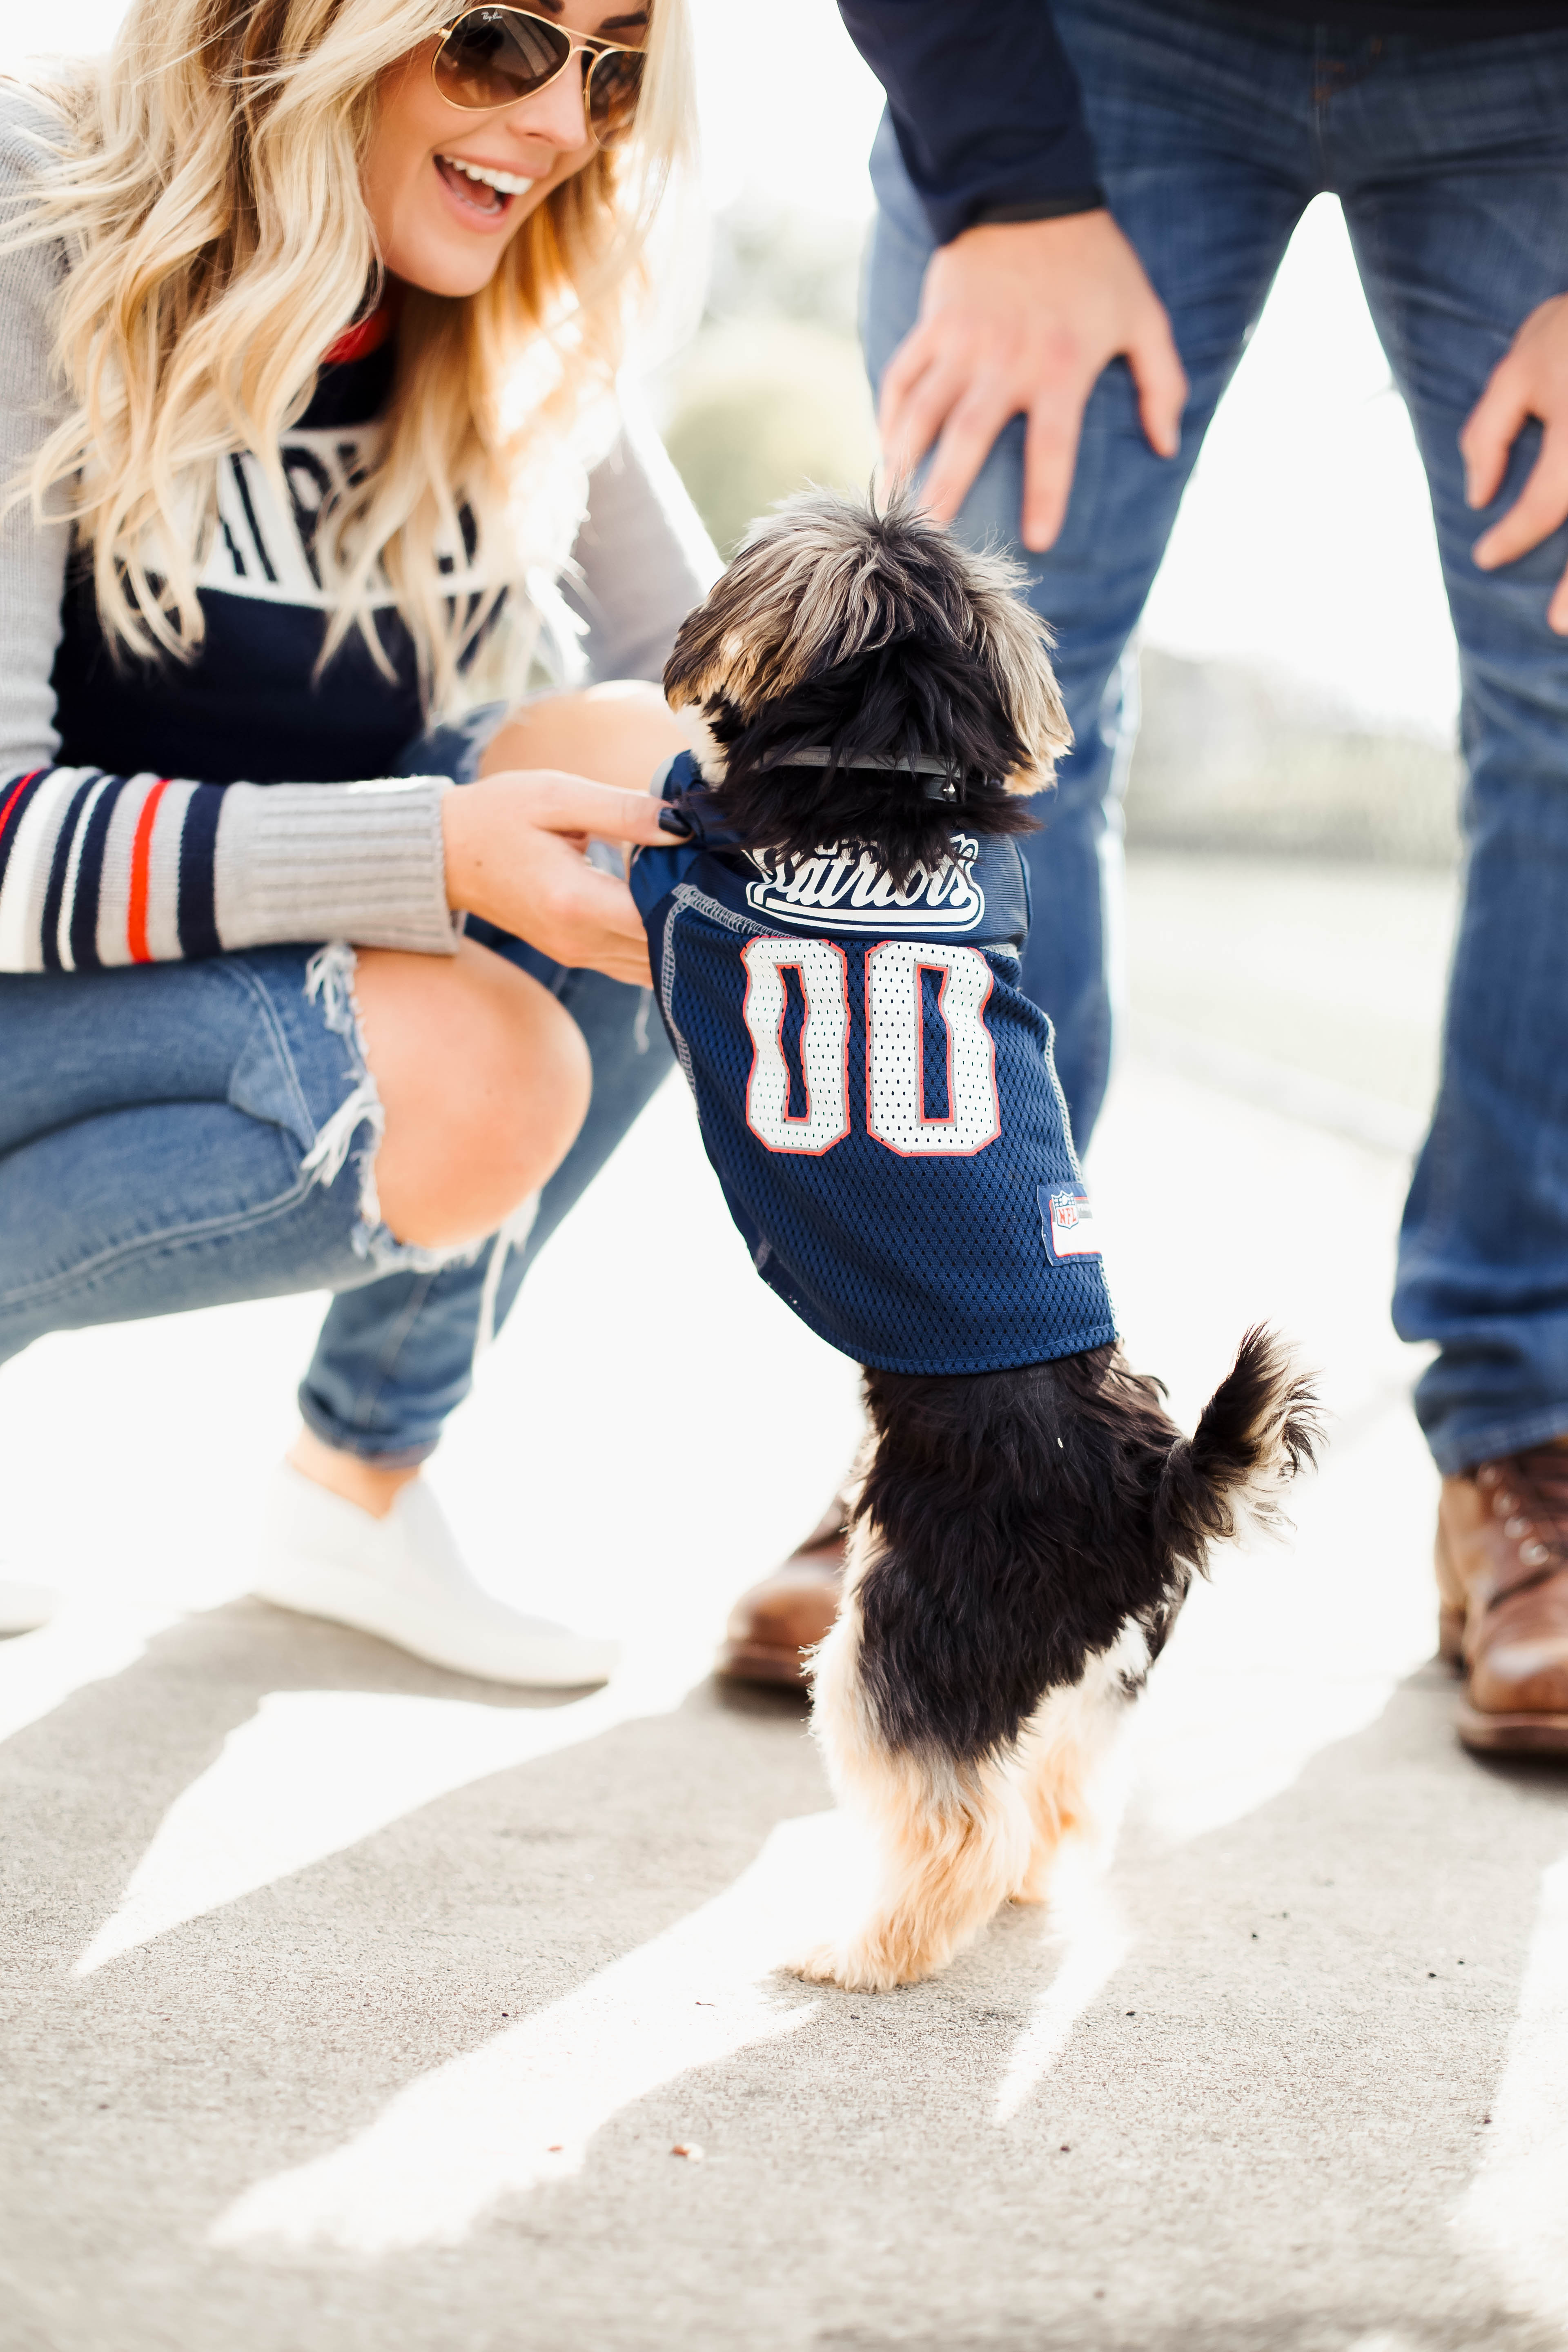 New England Patriots NFL Gear for the Family